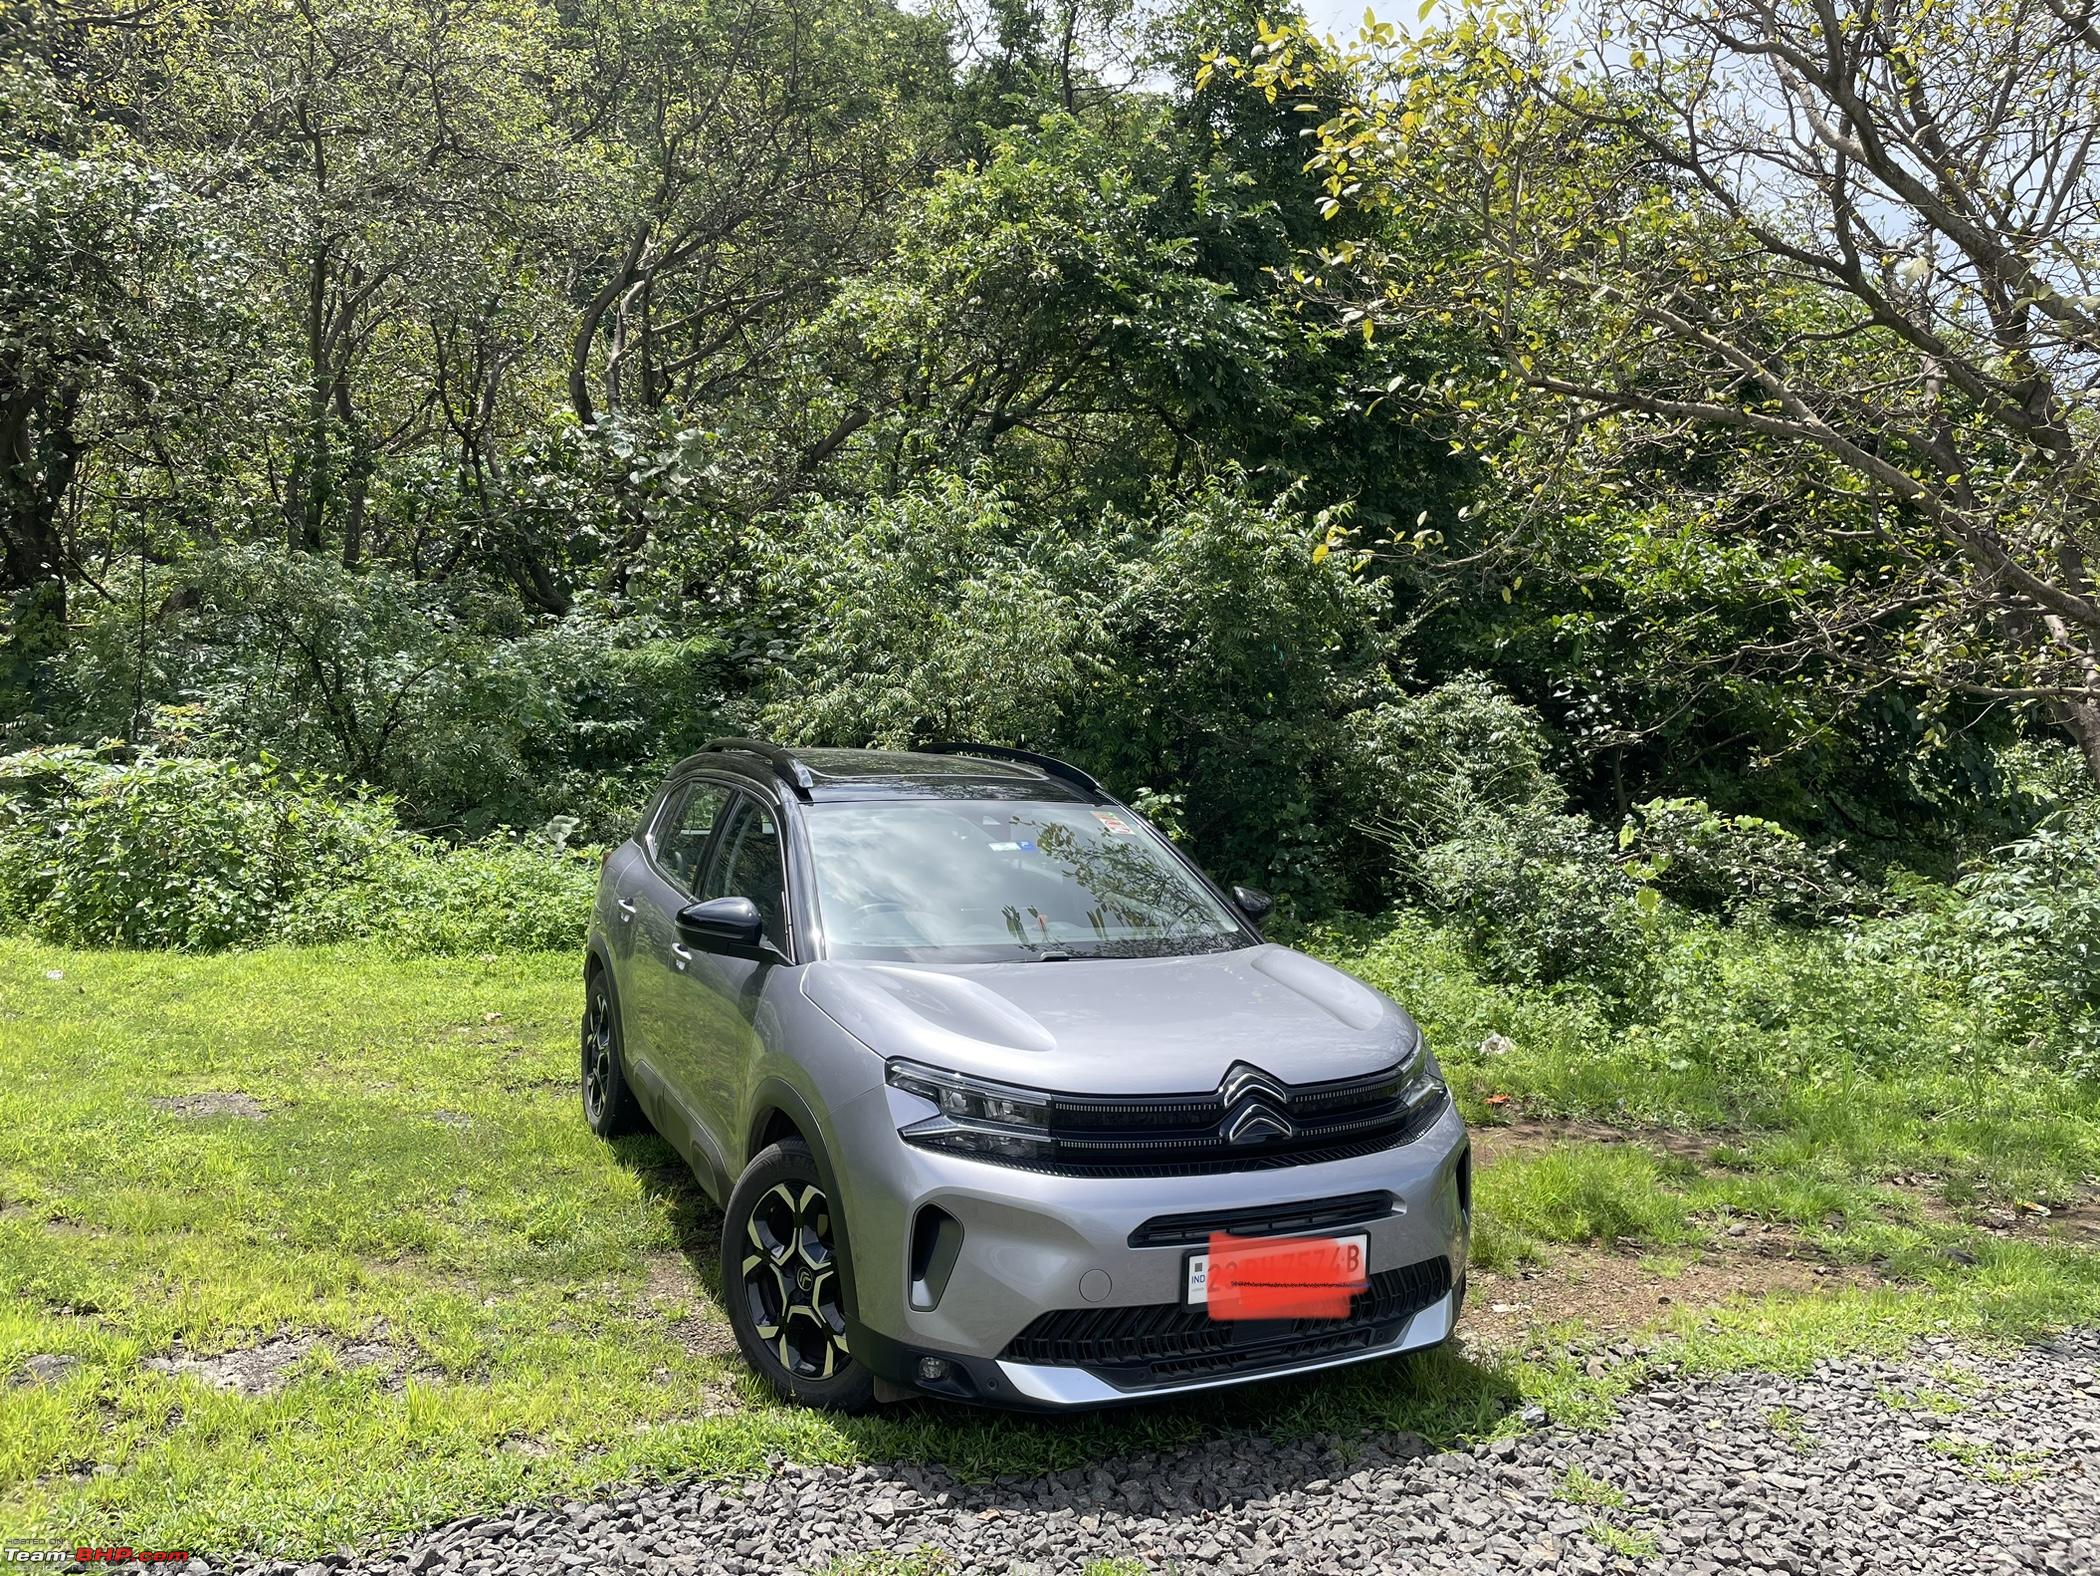 2022 Citroen C4 SUV in-depth review – comfy or overhyped?